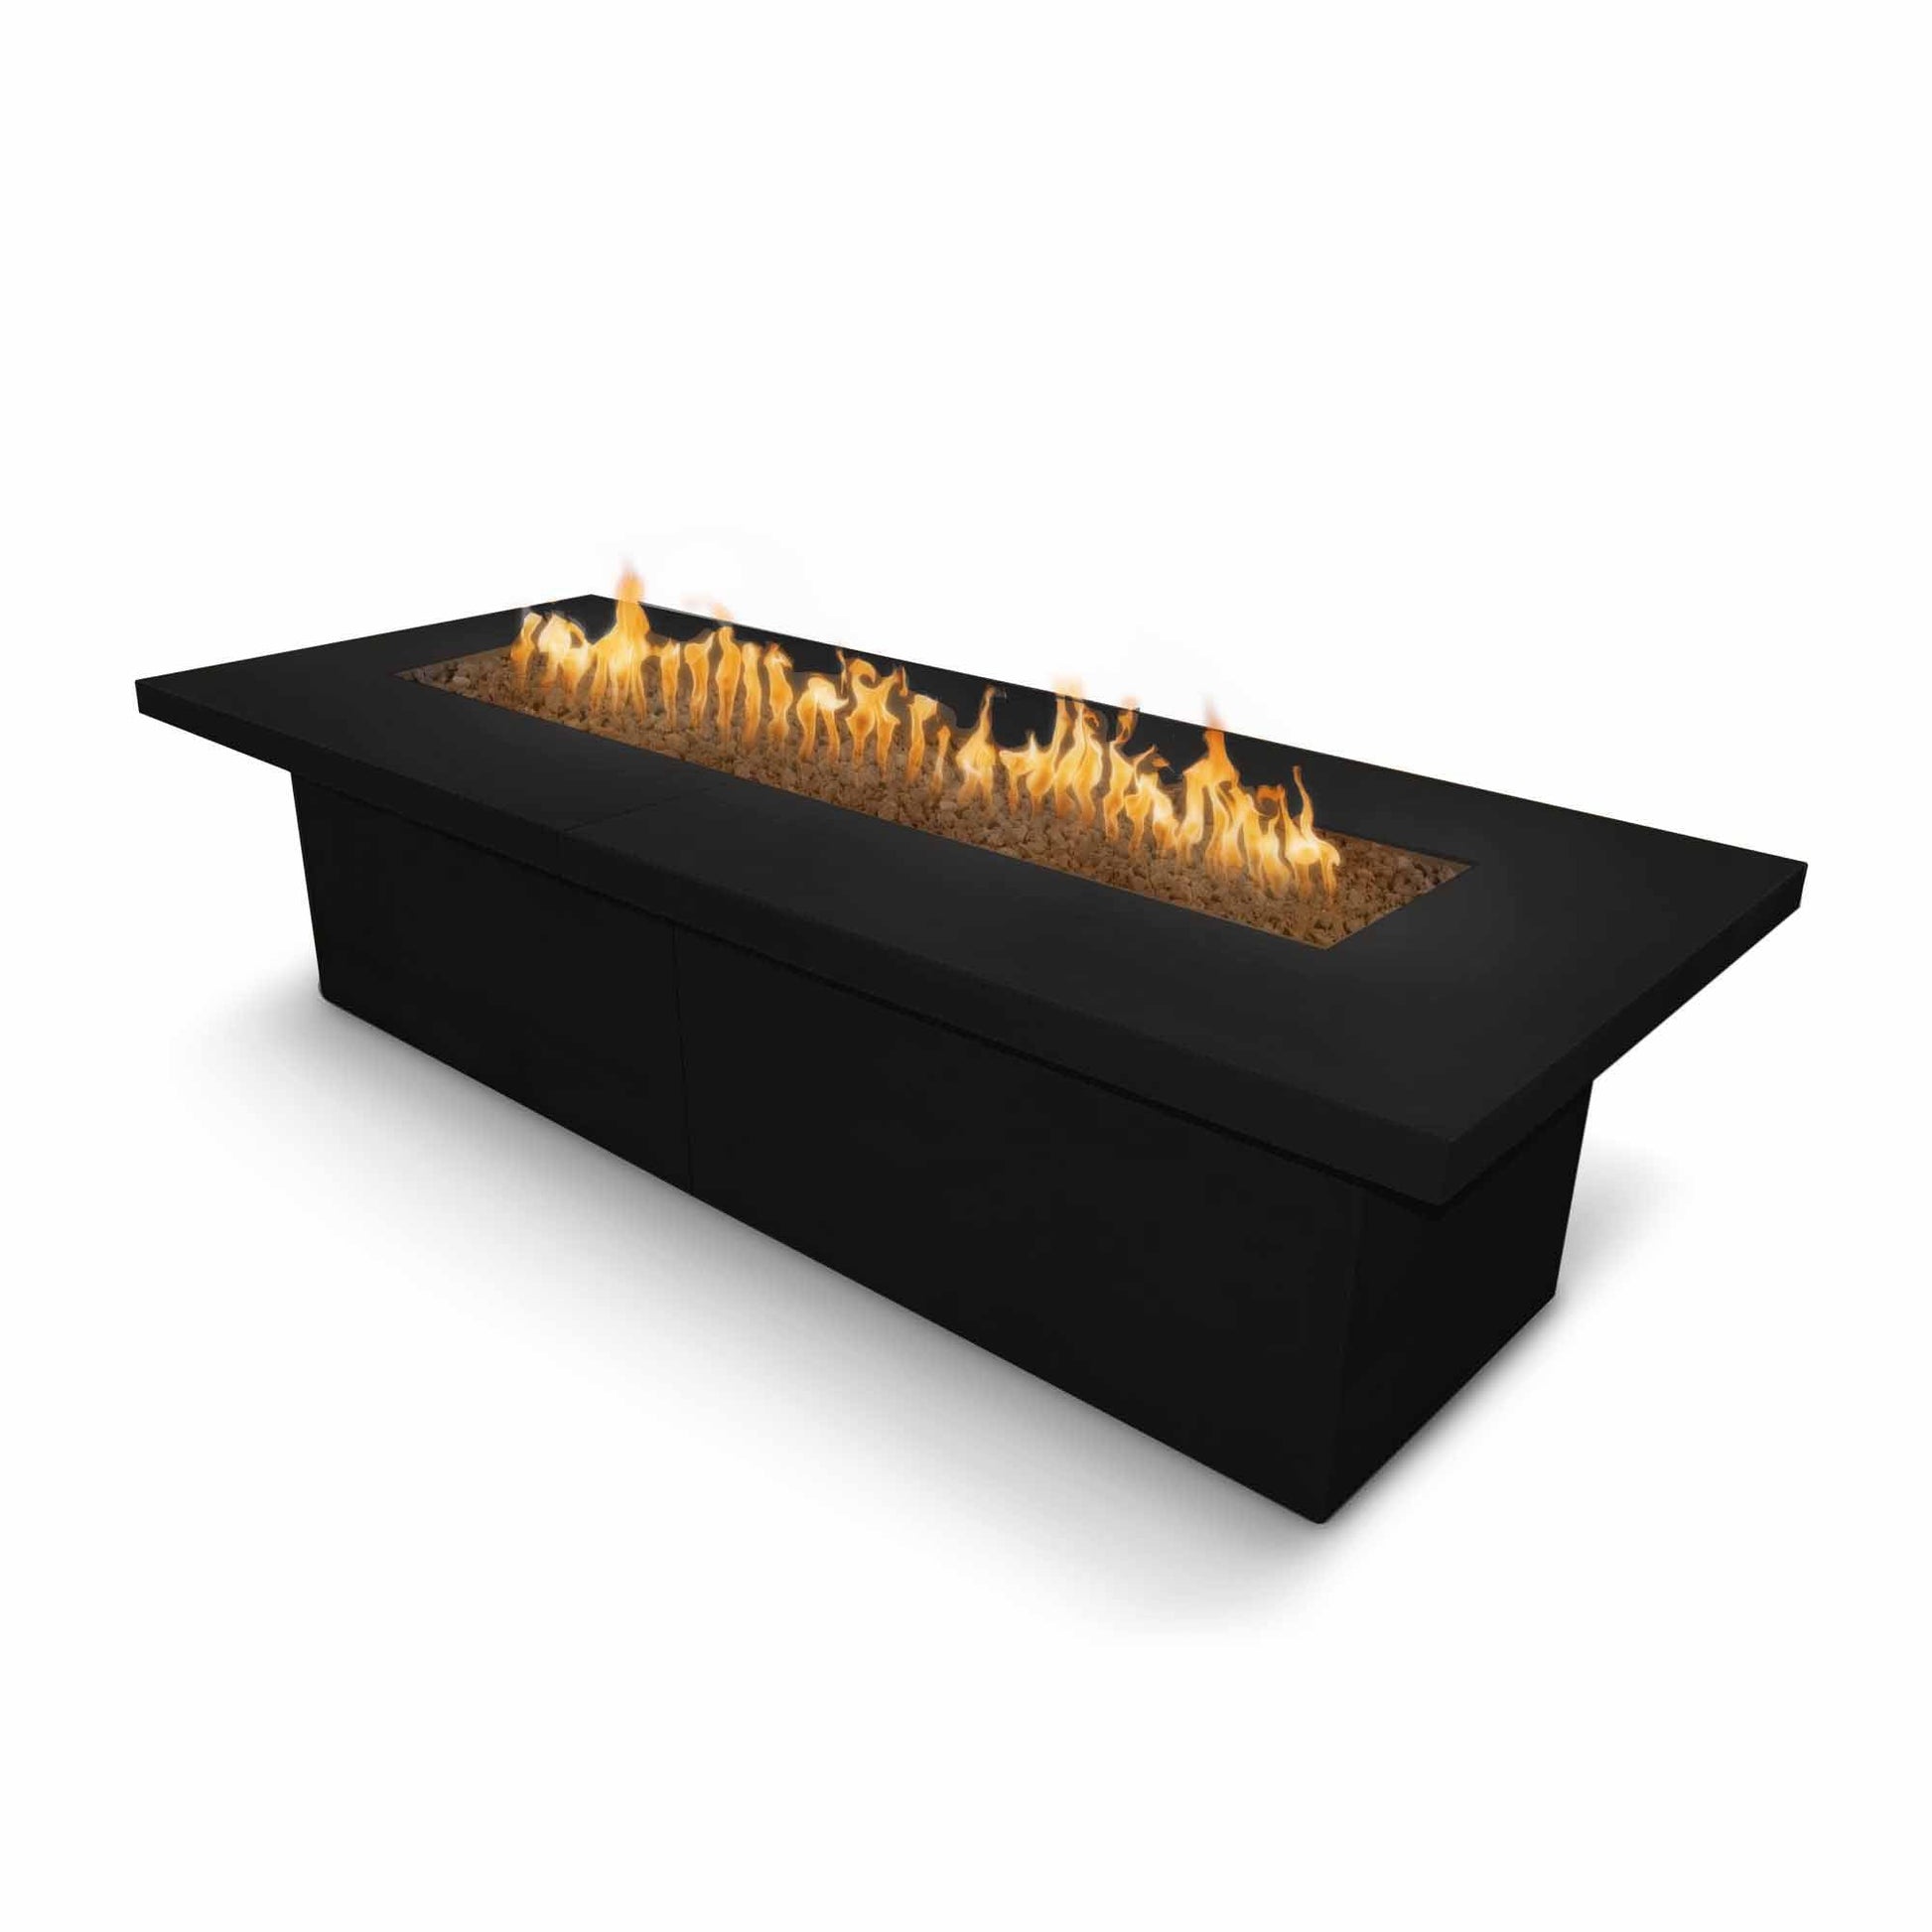 The Outdoor Plus Rectangular Newport 72" Hammered Copper Liquid Propane Fire Pit with 110V Electronic Ignition